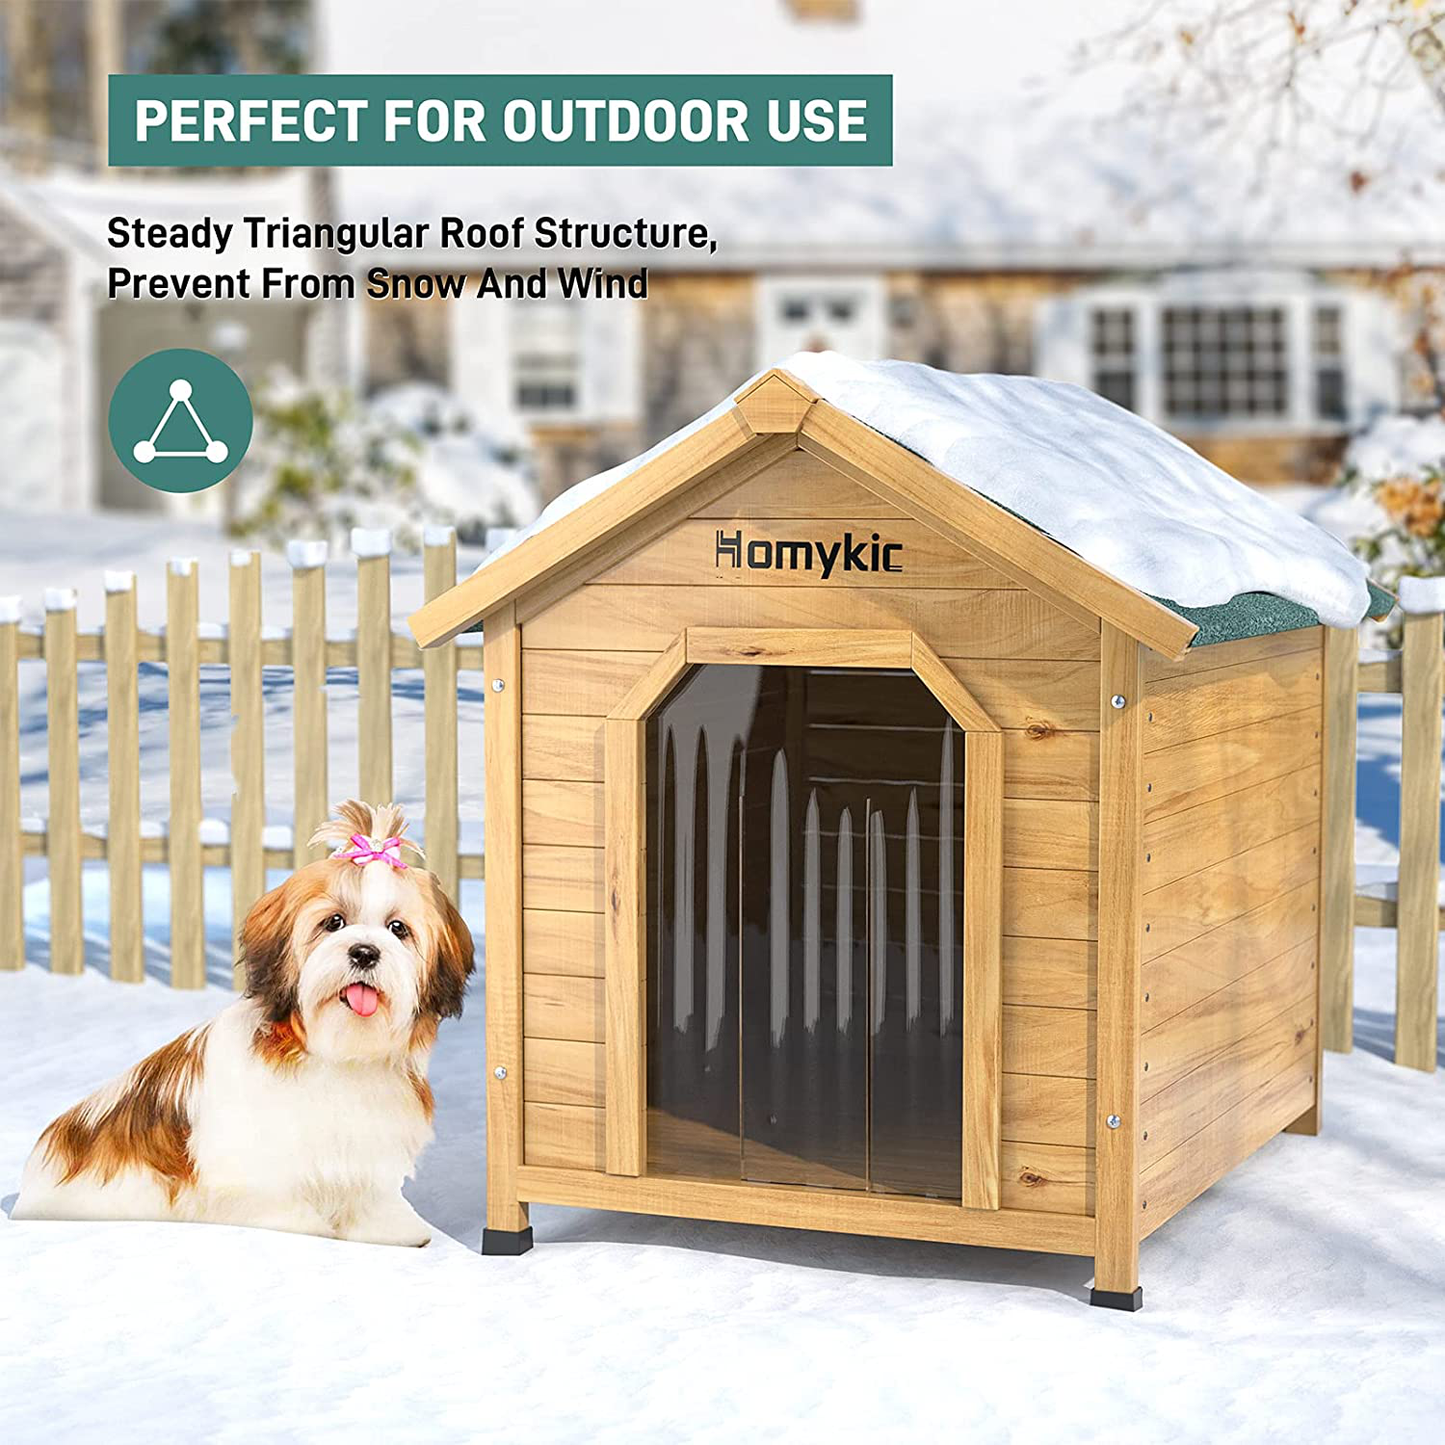 Homykic Dog House Outdoor Wooden, Fir Wood Pet Kennel Doghouse Log Cabin Shelter Weatherproof with Door Flap, Raised Floor, for Cat Rabbit Bunny, 23.6X24.8X29.6 Inch, Small